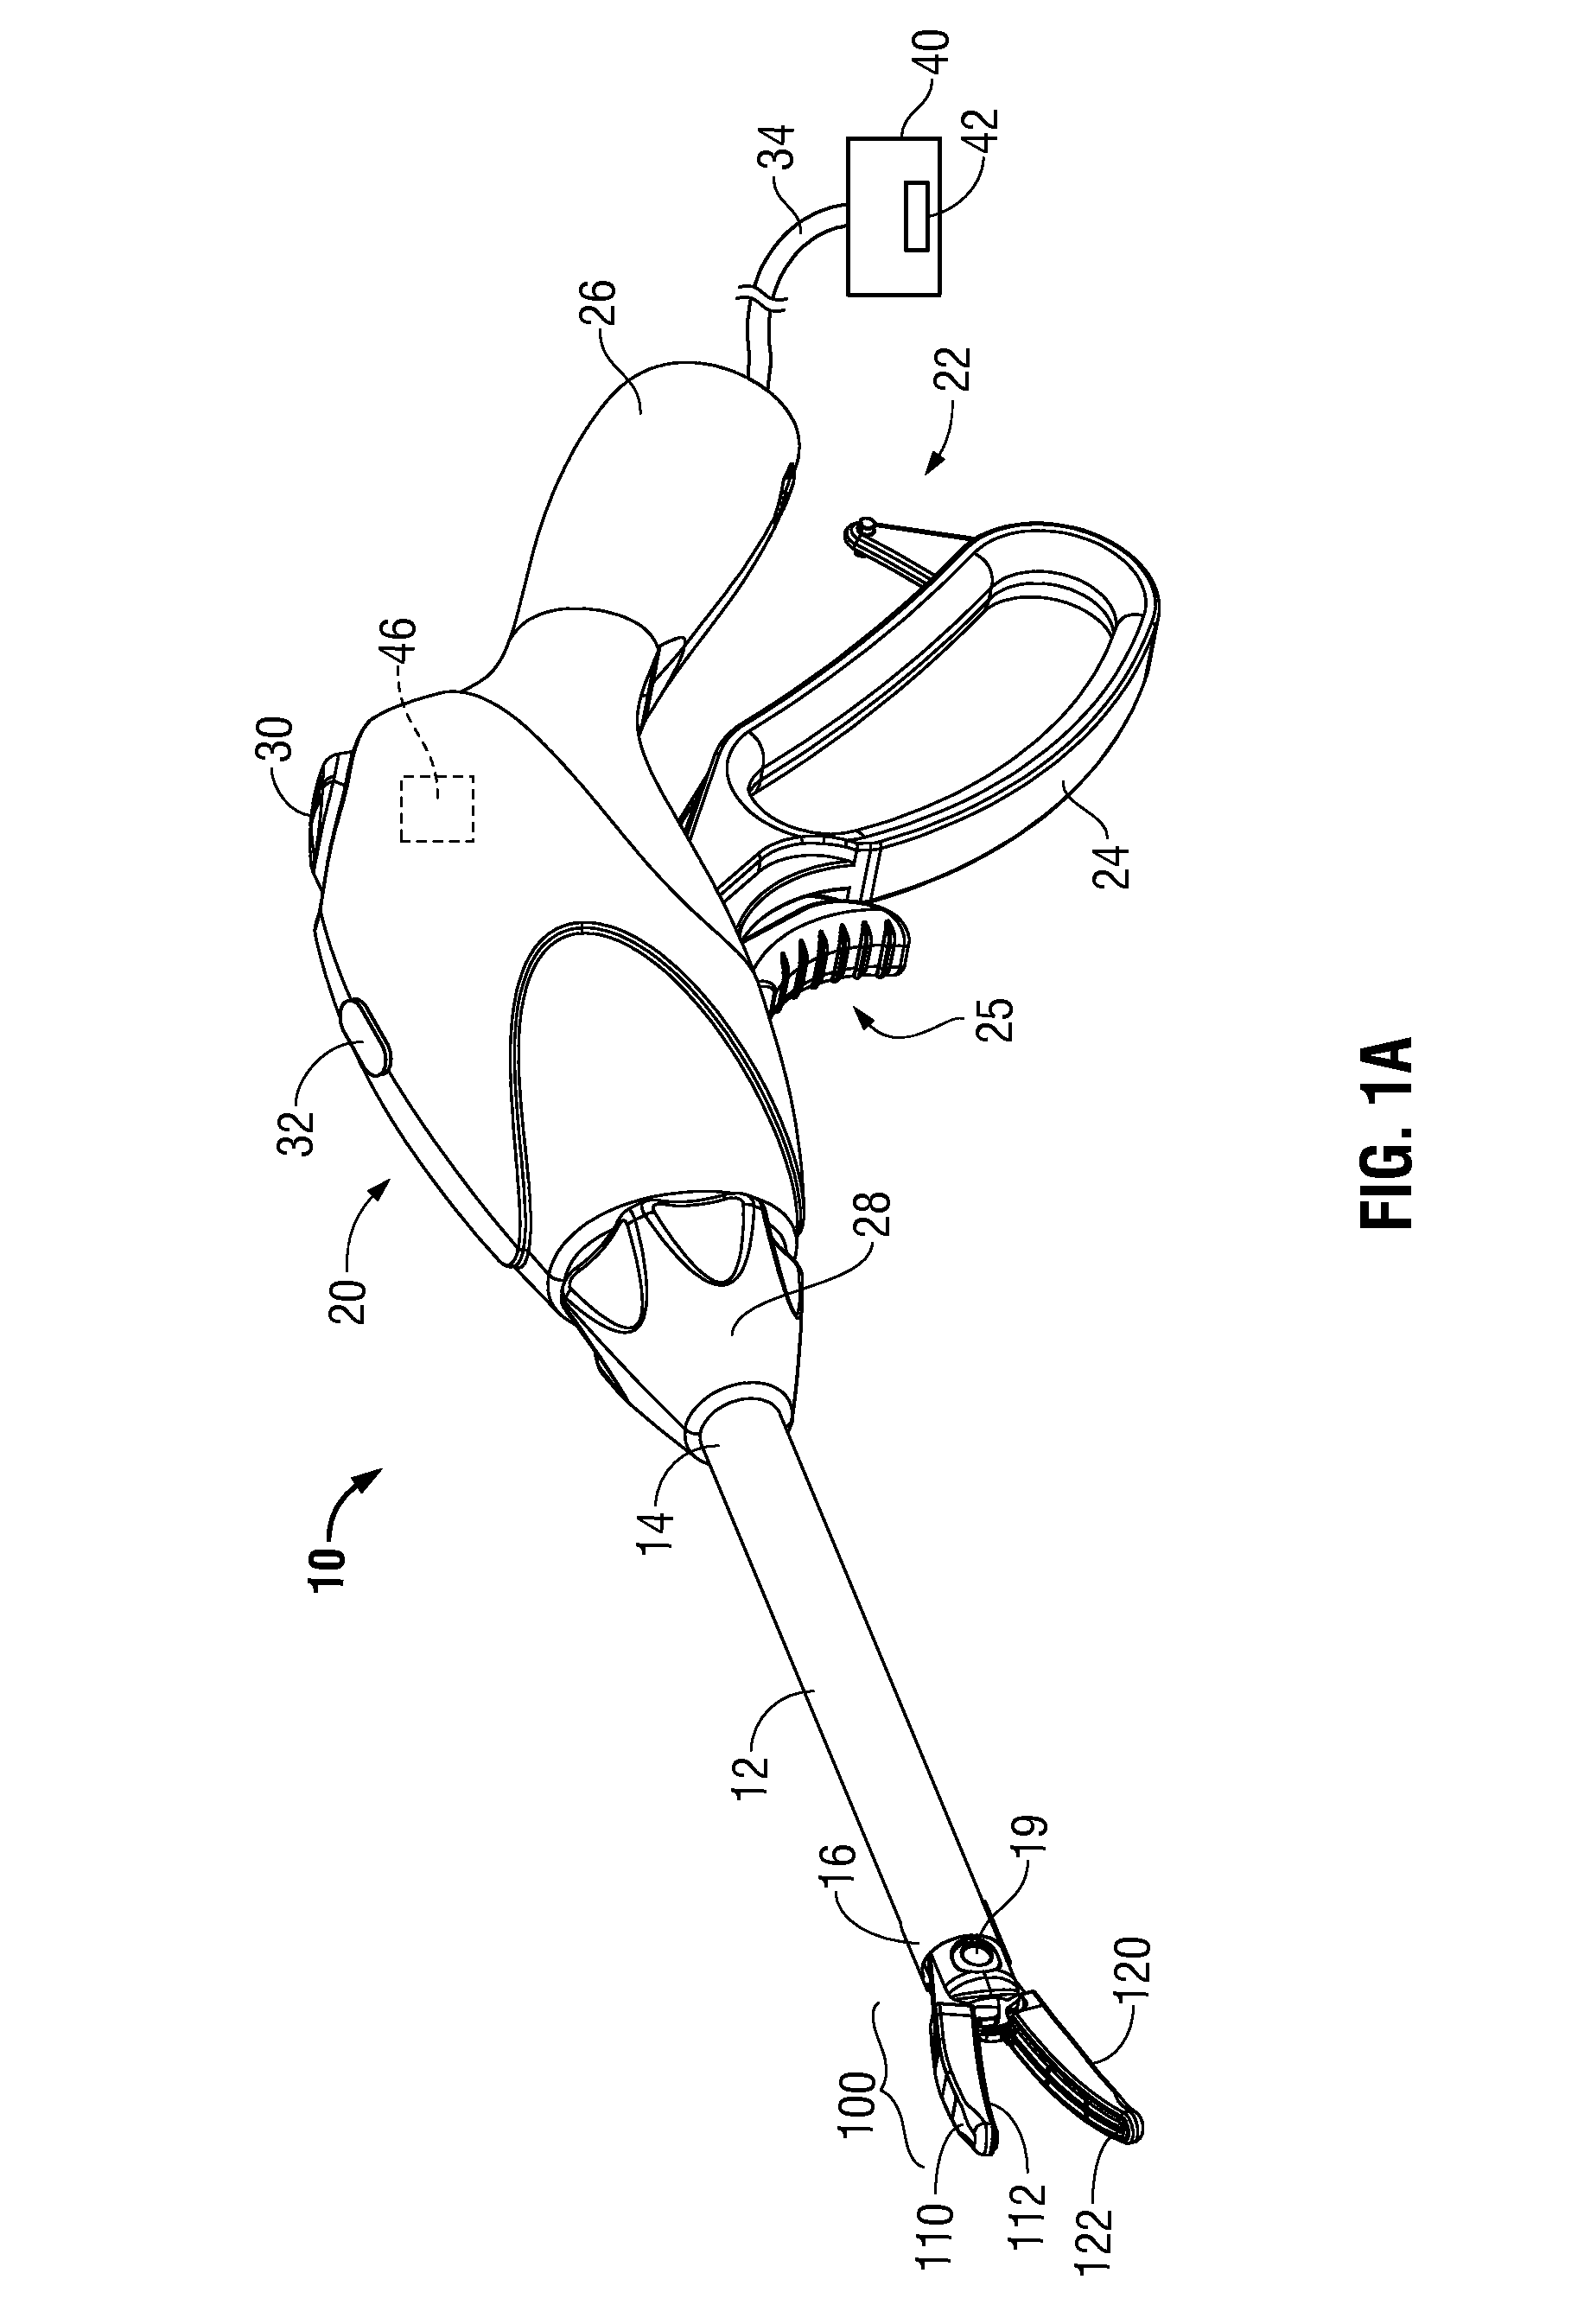 Surgical device with an end-effector assembly and system for monitoring of tissue during a surgical procedure